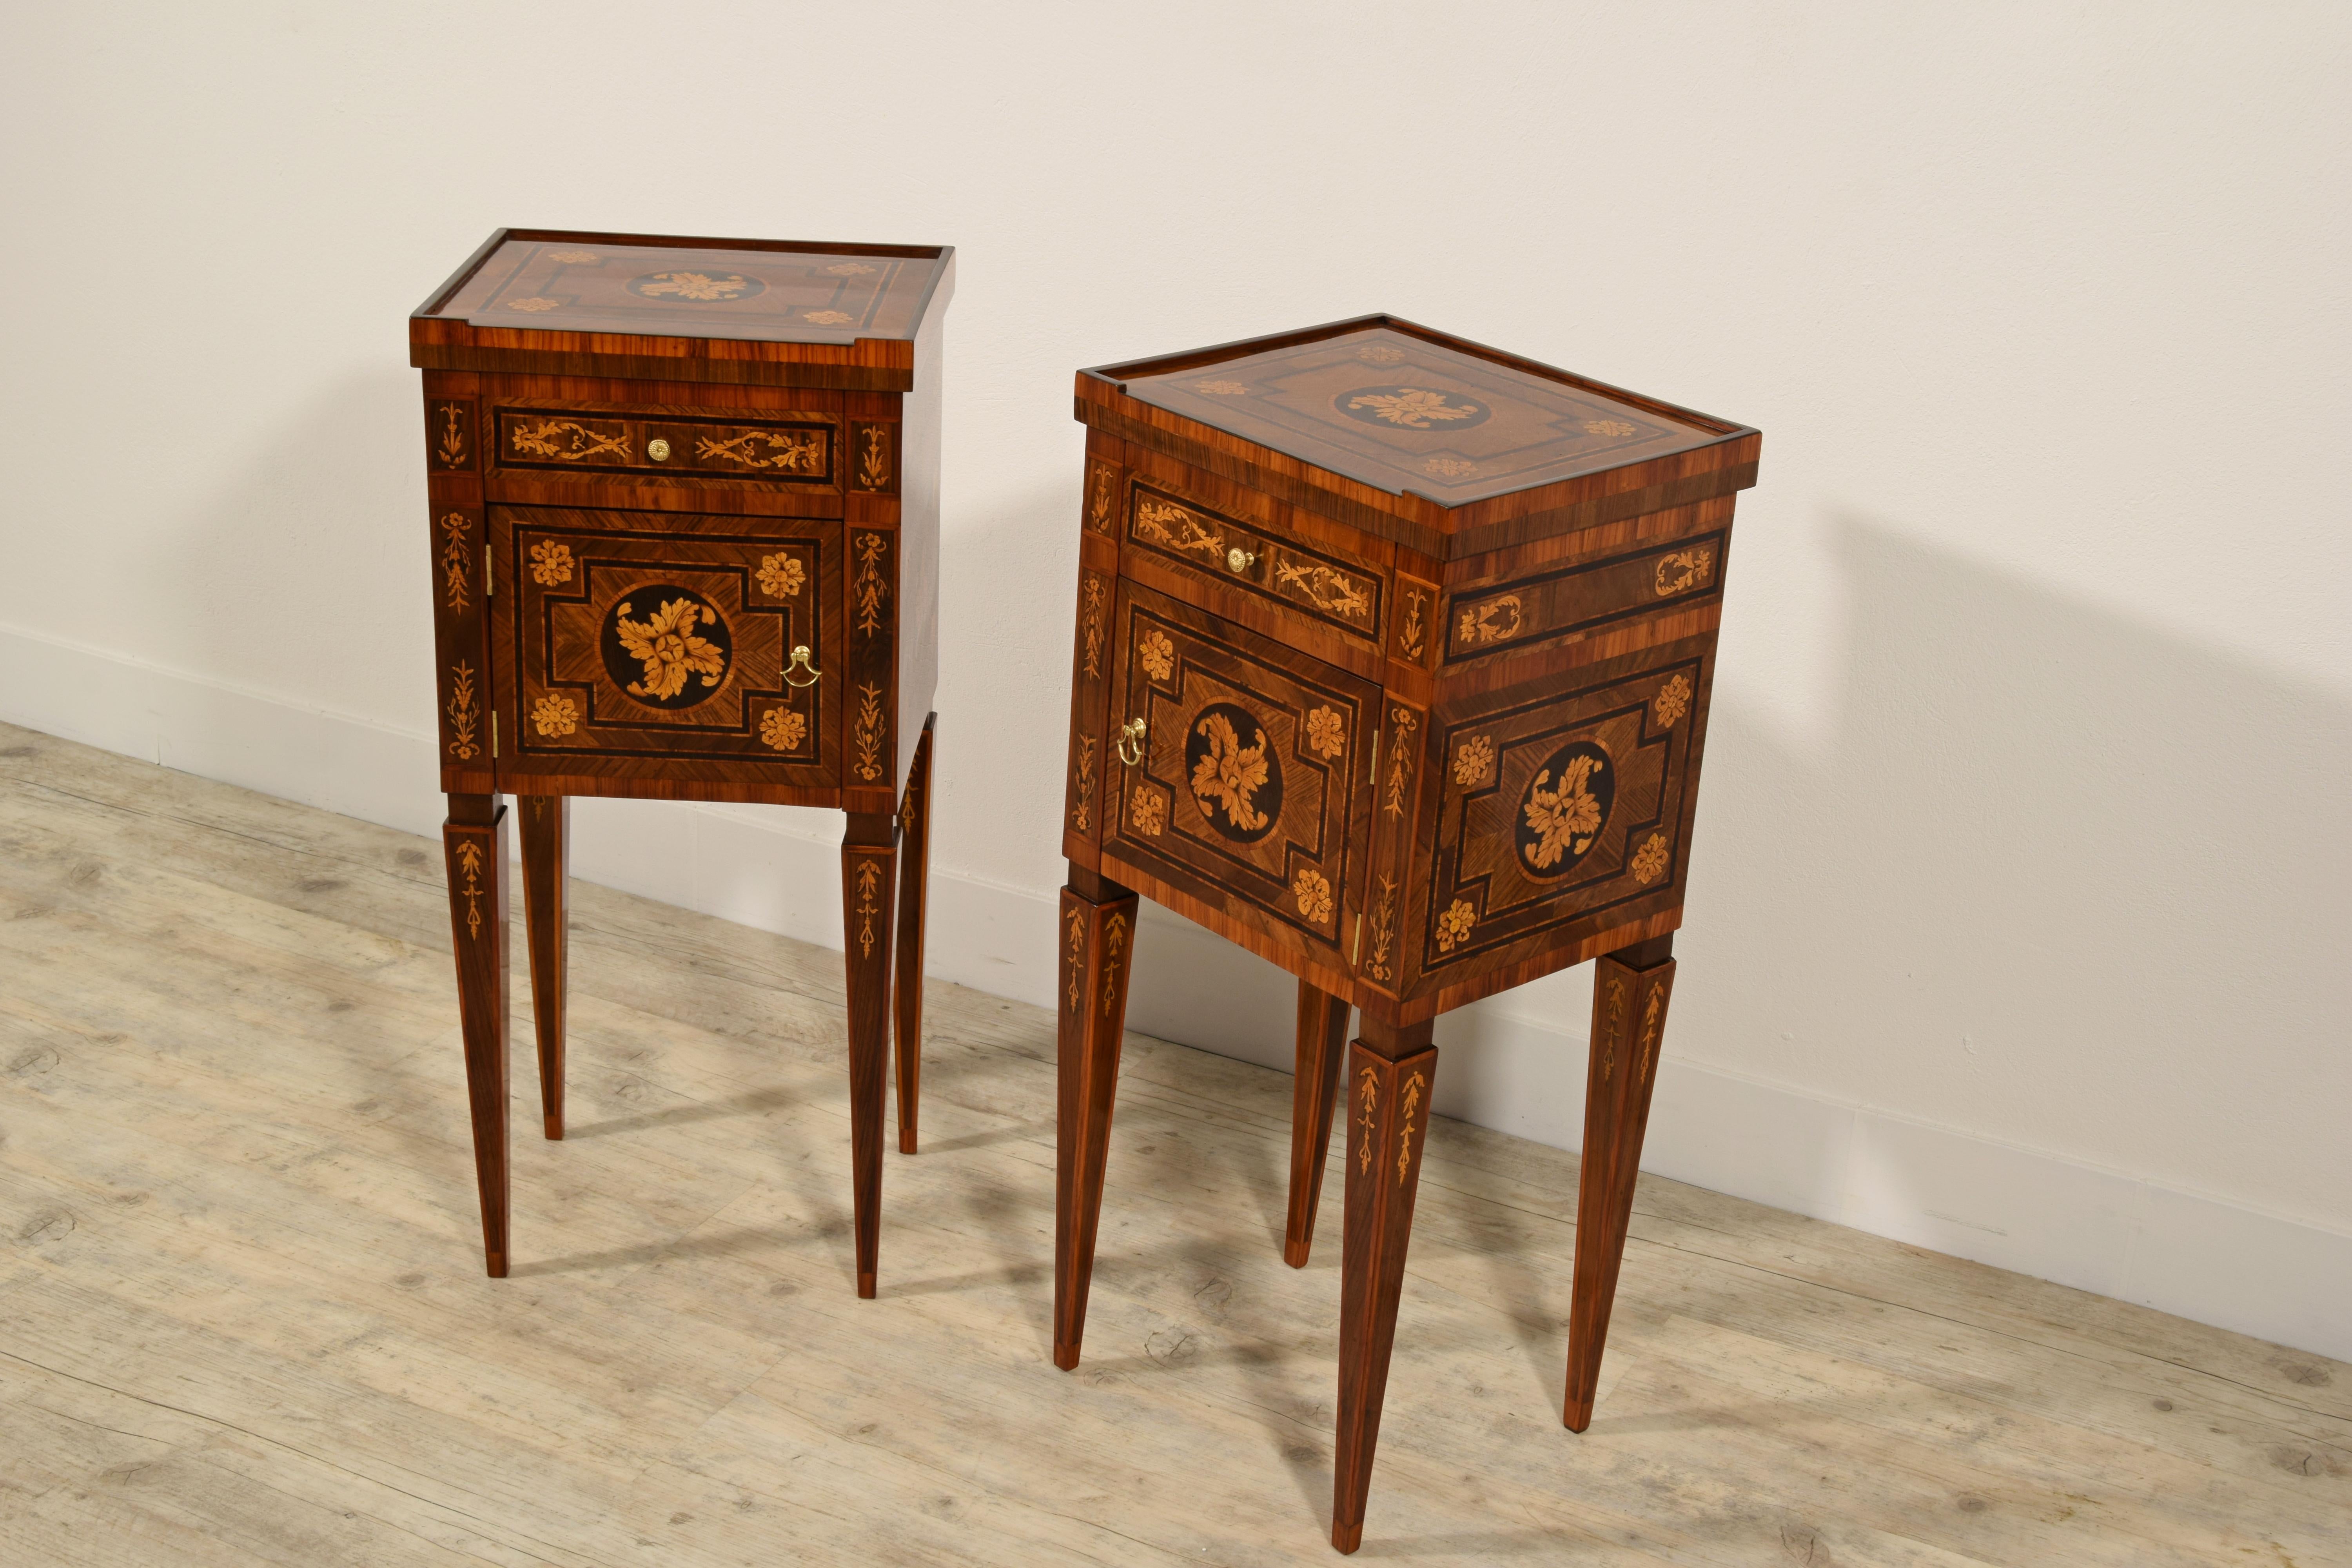 18th Century, Pair of Italian Neoclassical Inlaid Wood Bedside Tables 15